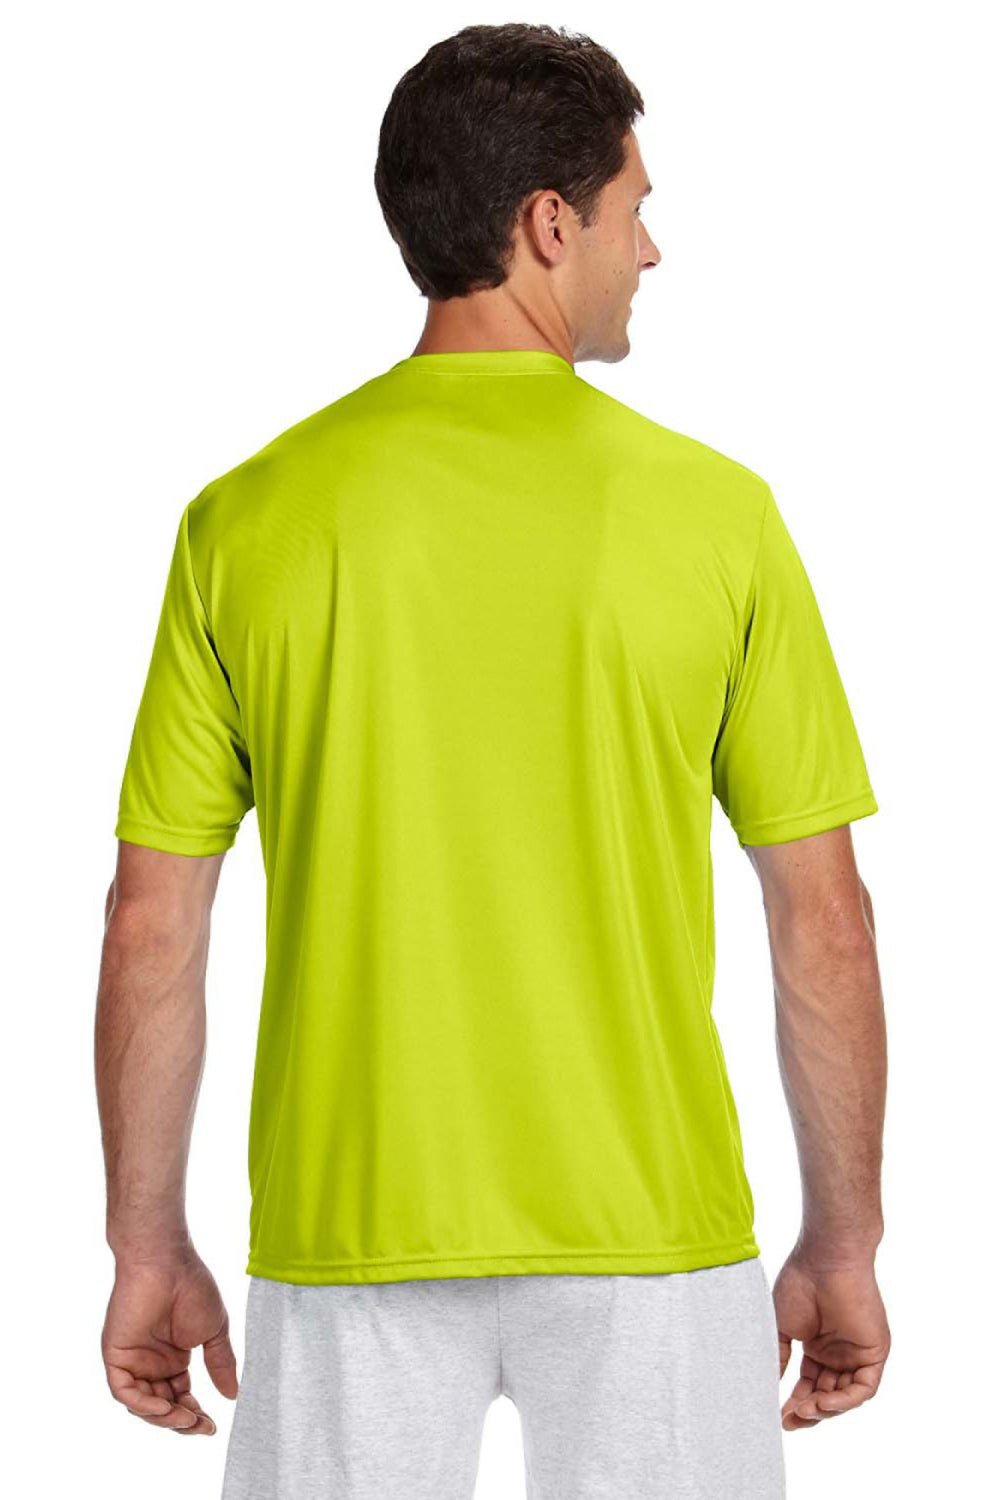 A4 N3142 Mens Performance Moisture Wicking Short Sleeve Crewneck T-Shirt Safety Yellow Model Back